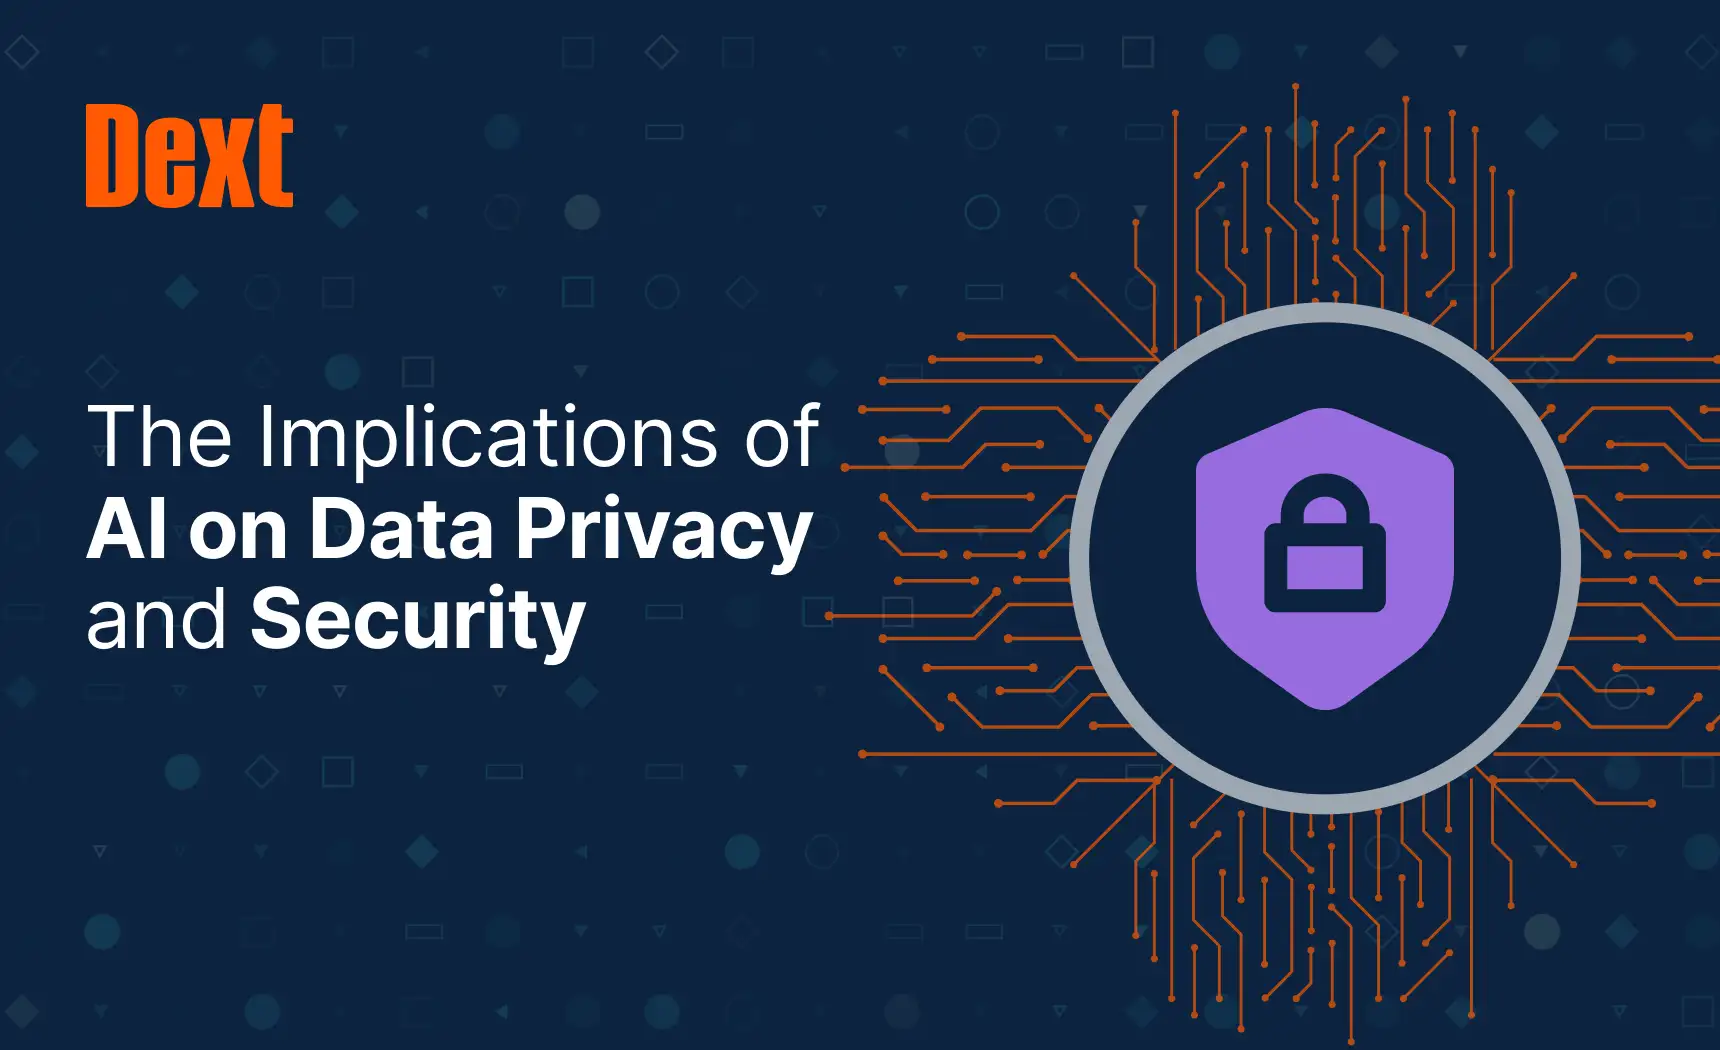 The Implications of AI on Data Privacy and Security by Dext image